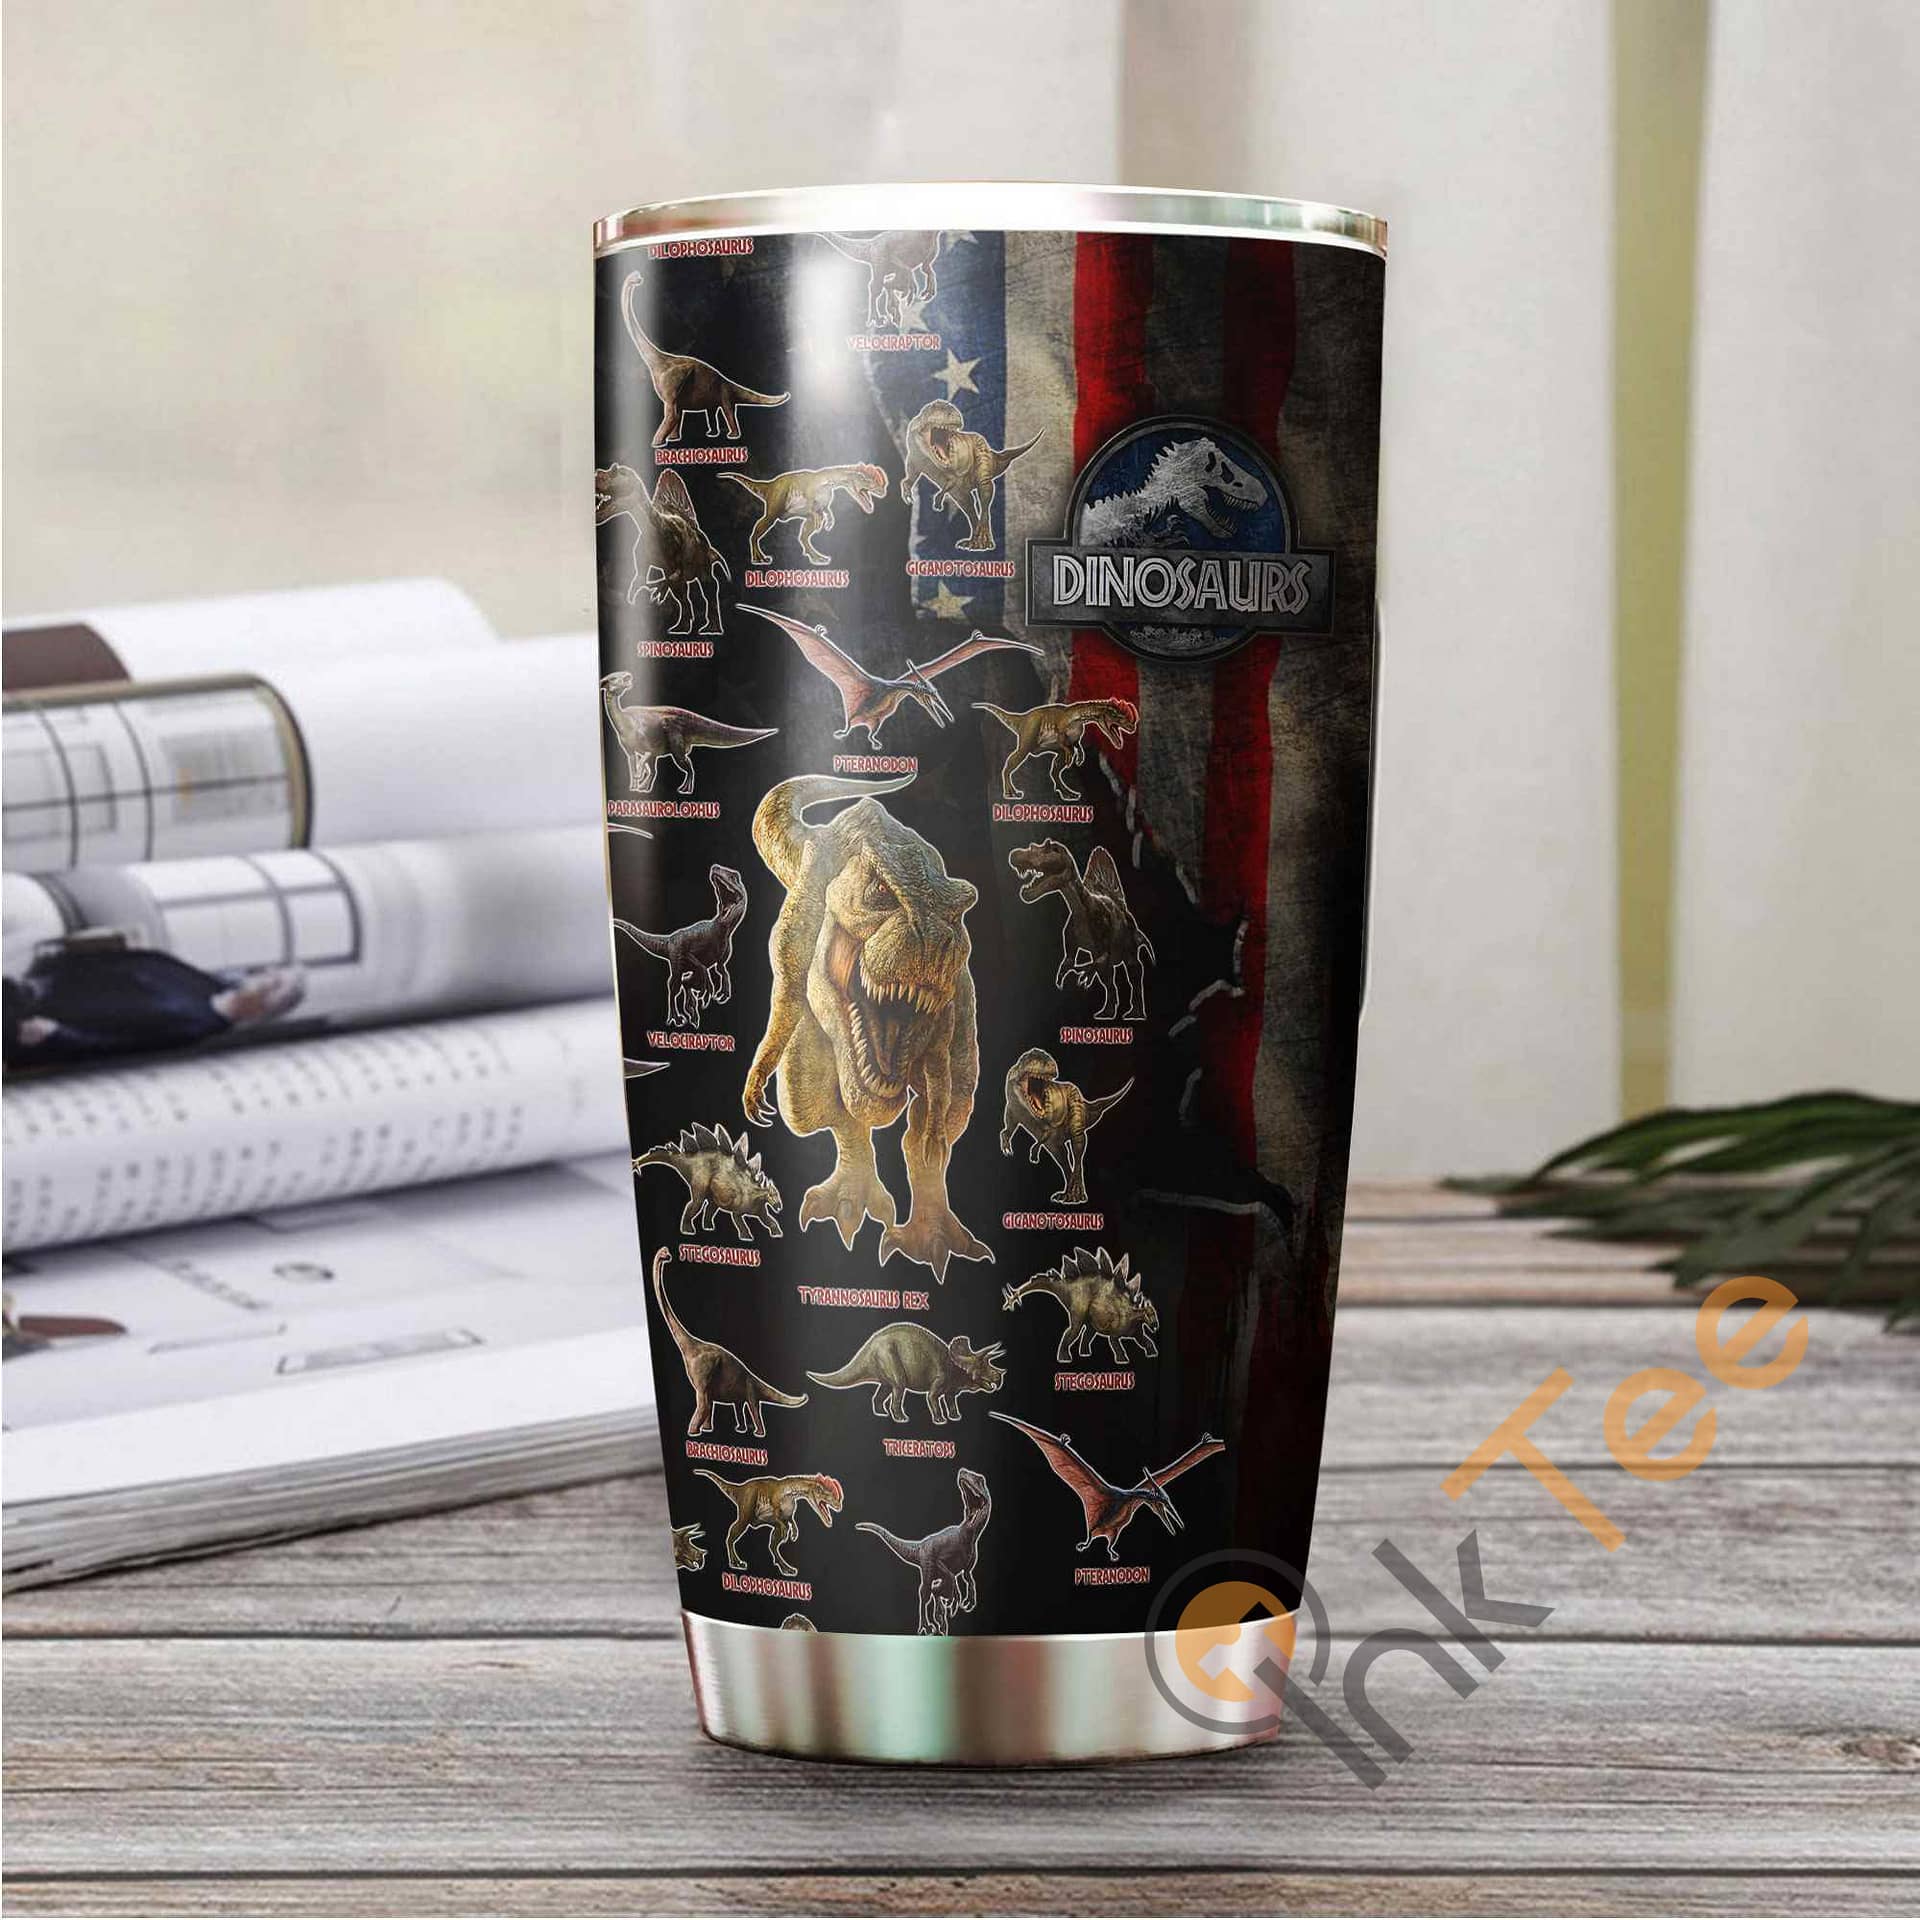 Amazing Dinosaurs Collection Art Stainless Steel Tumbler